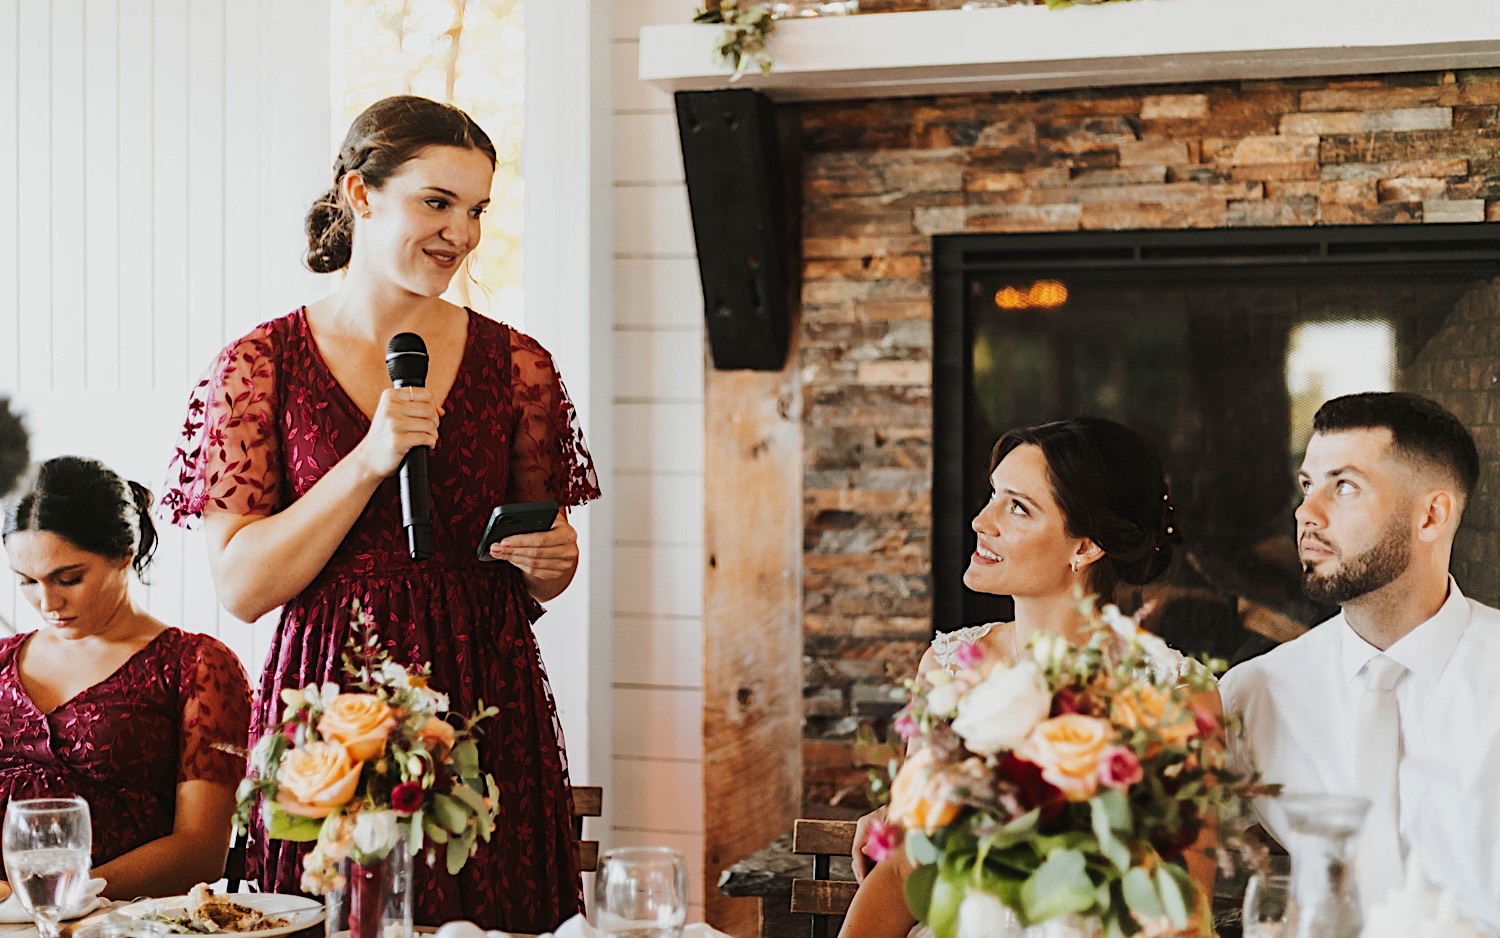 A bride and groom sit next to one another and look towards a standing bridesmaid as she gives a speech during their wedding reception at Legacy Hill Farm